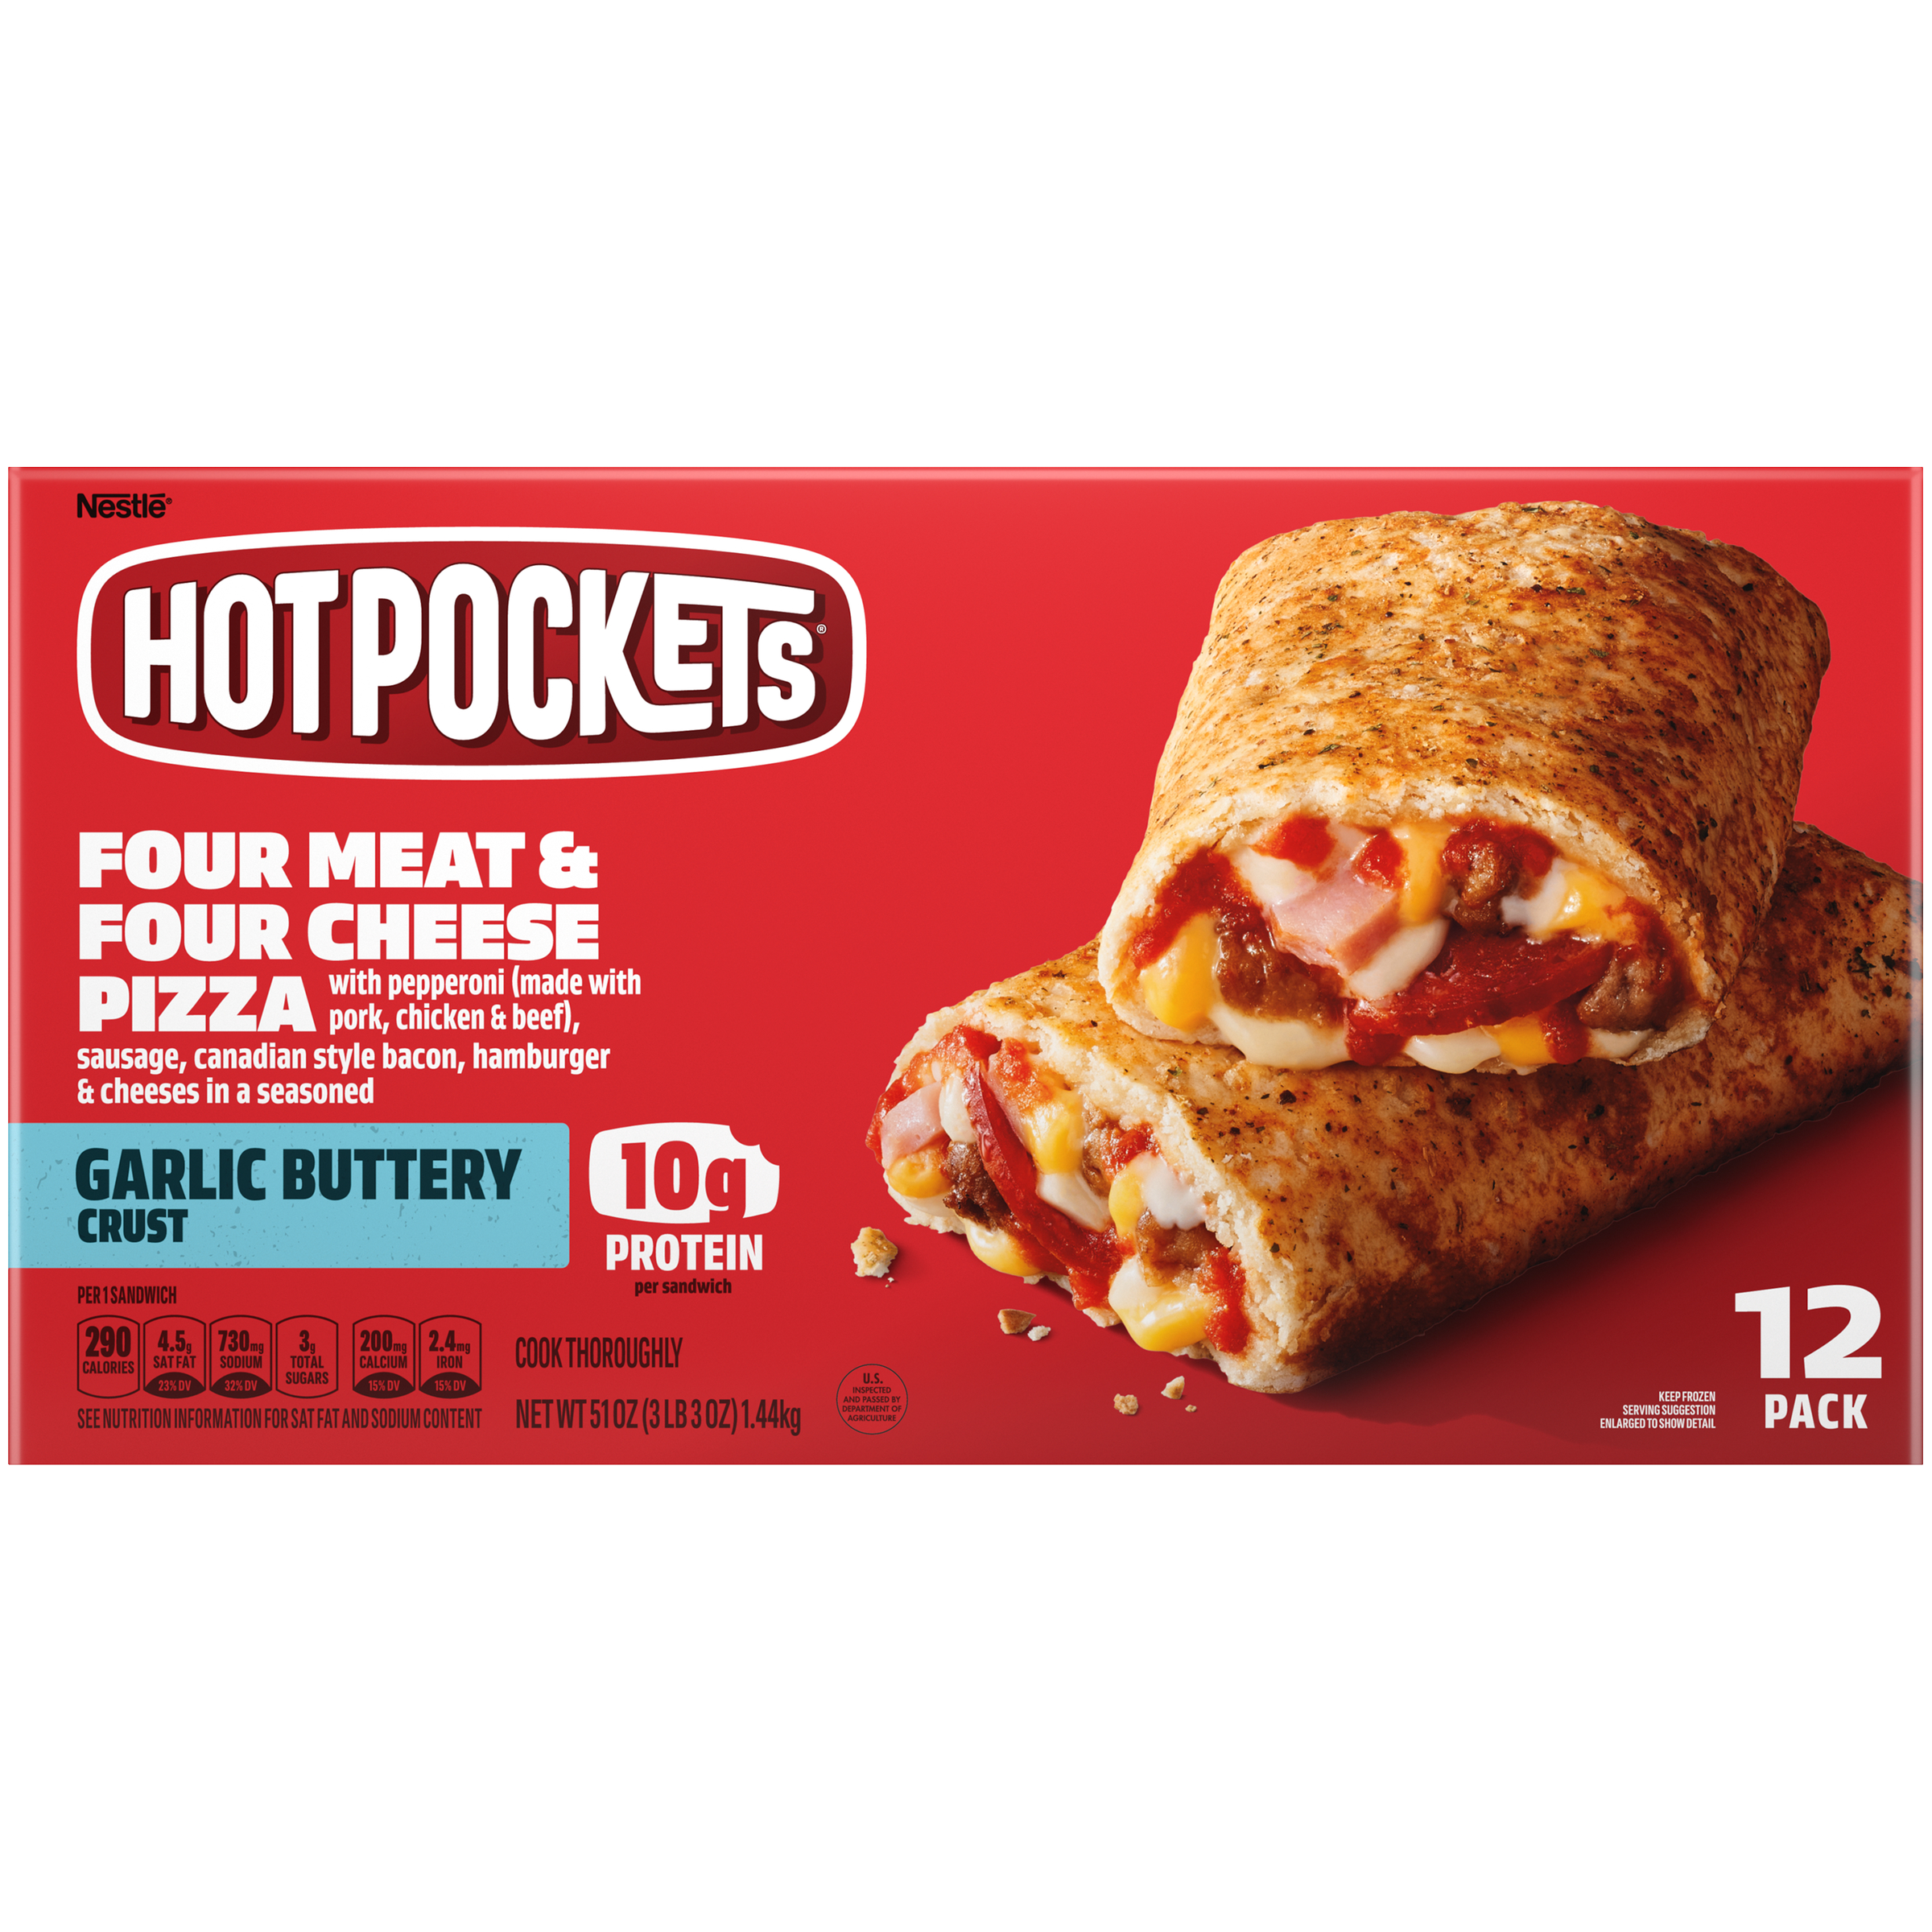 HOT POCKETS Garlic Buttery Crust Four Meat & Cheese Pizza 4 units per case 51.0 oz